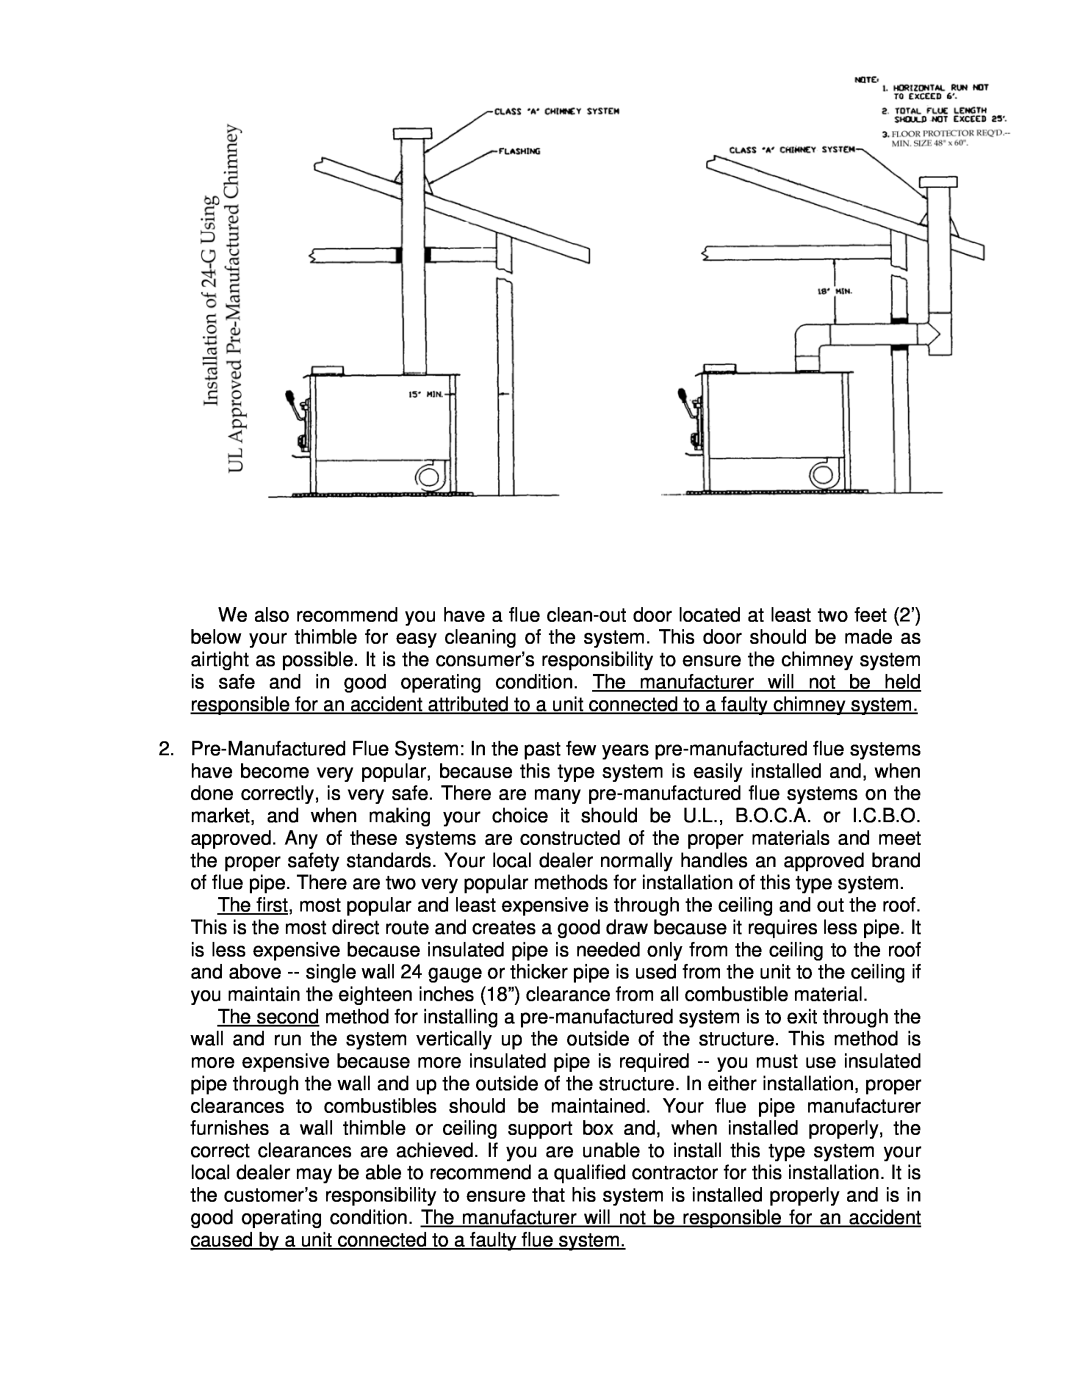 England's Stove Works 24-G operation manual 